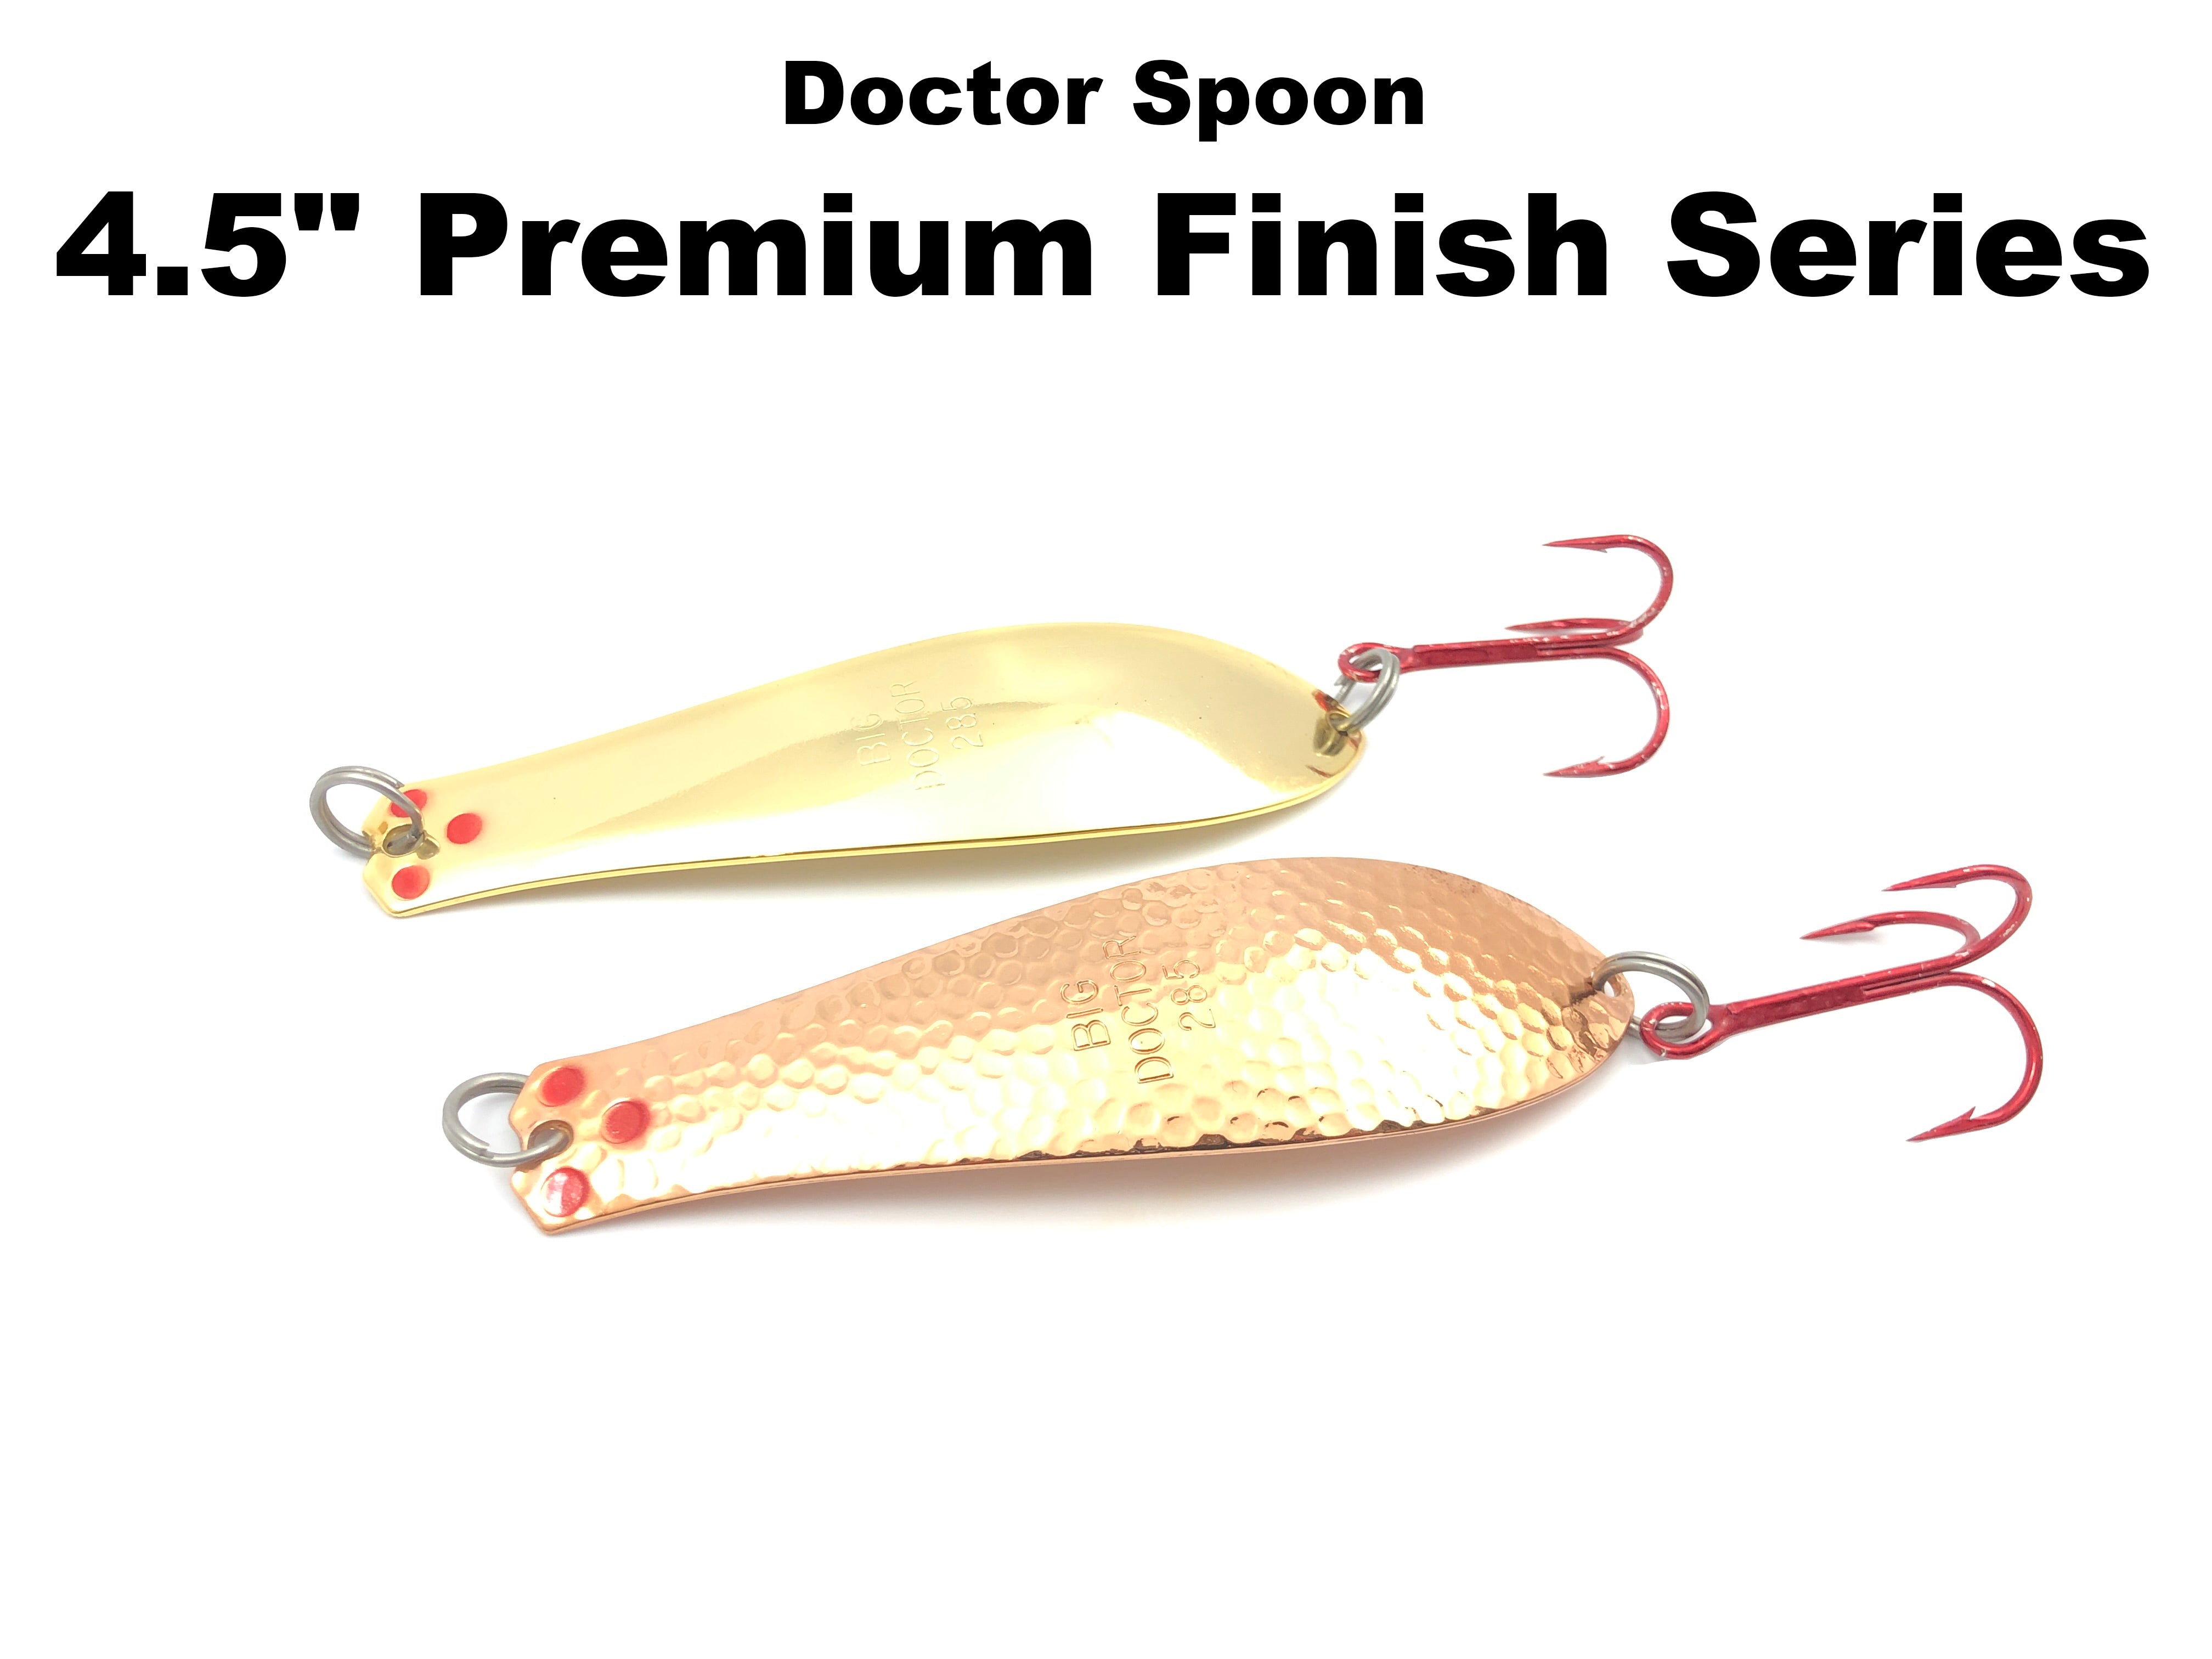 Yellow Bird - Premium Doctor Spoon with Red LazerSharp Hooks in (PM402)  Hammered Gold - 3.75 5/8oz 